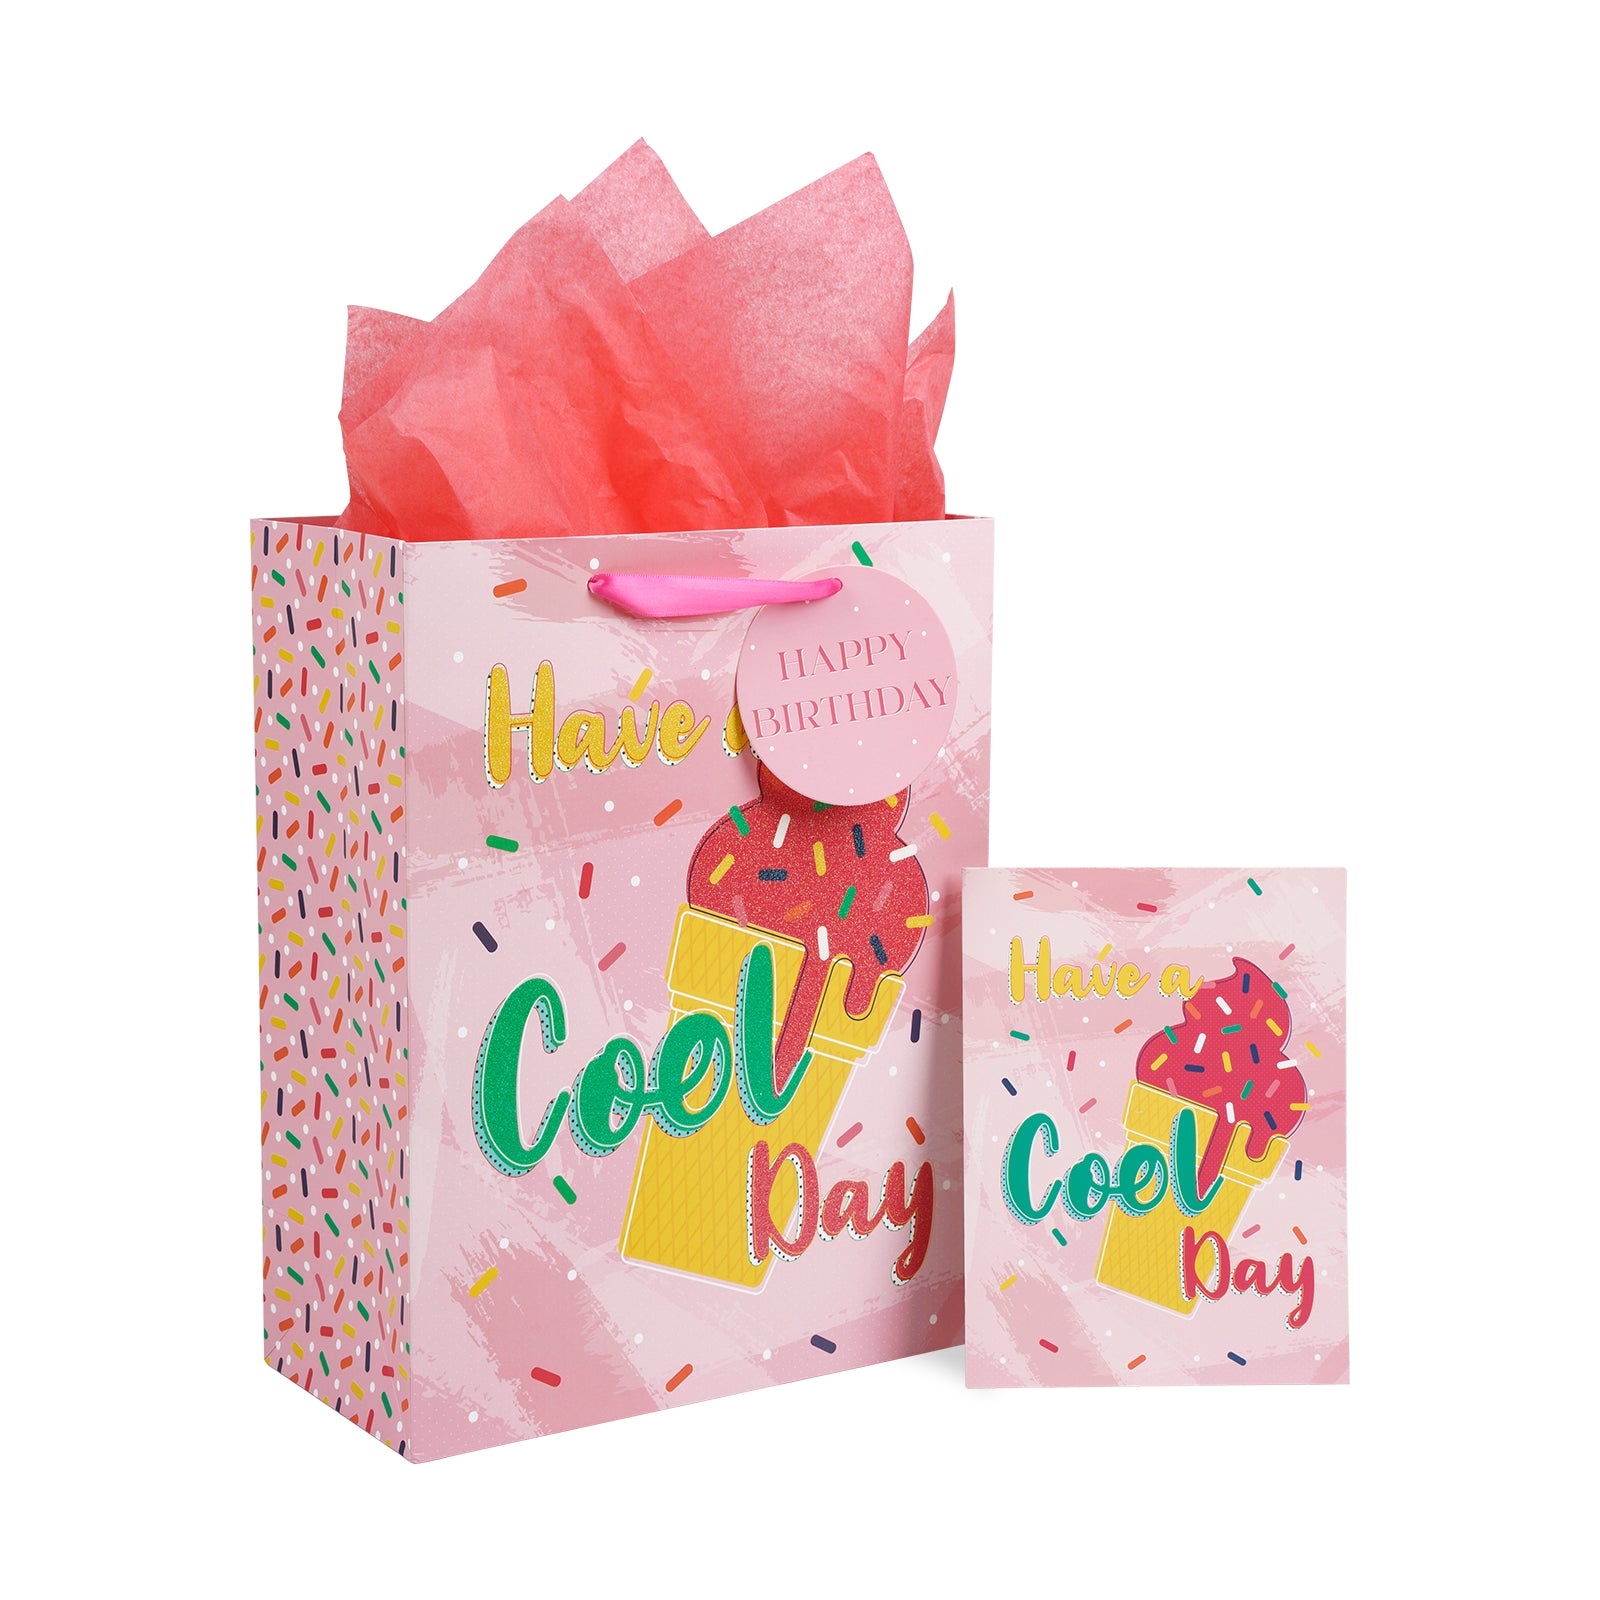 MAYPLUSS 13 Large Gift Bag with Birthday Card and Tissue Paper